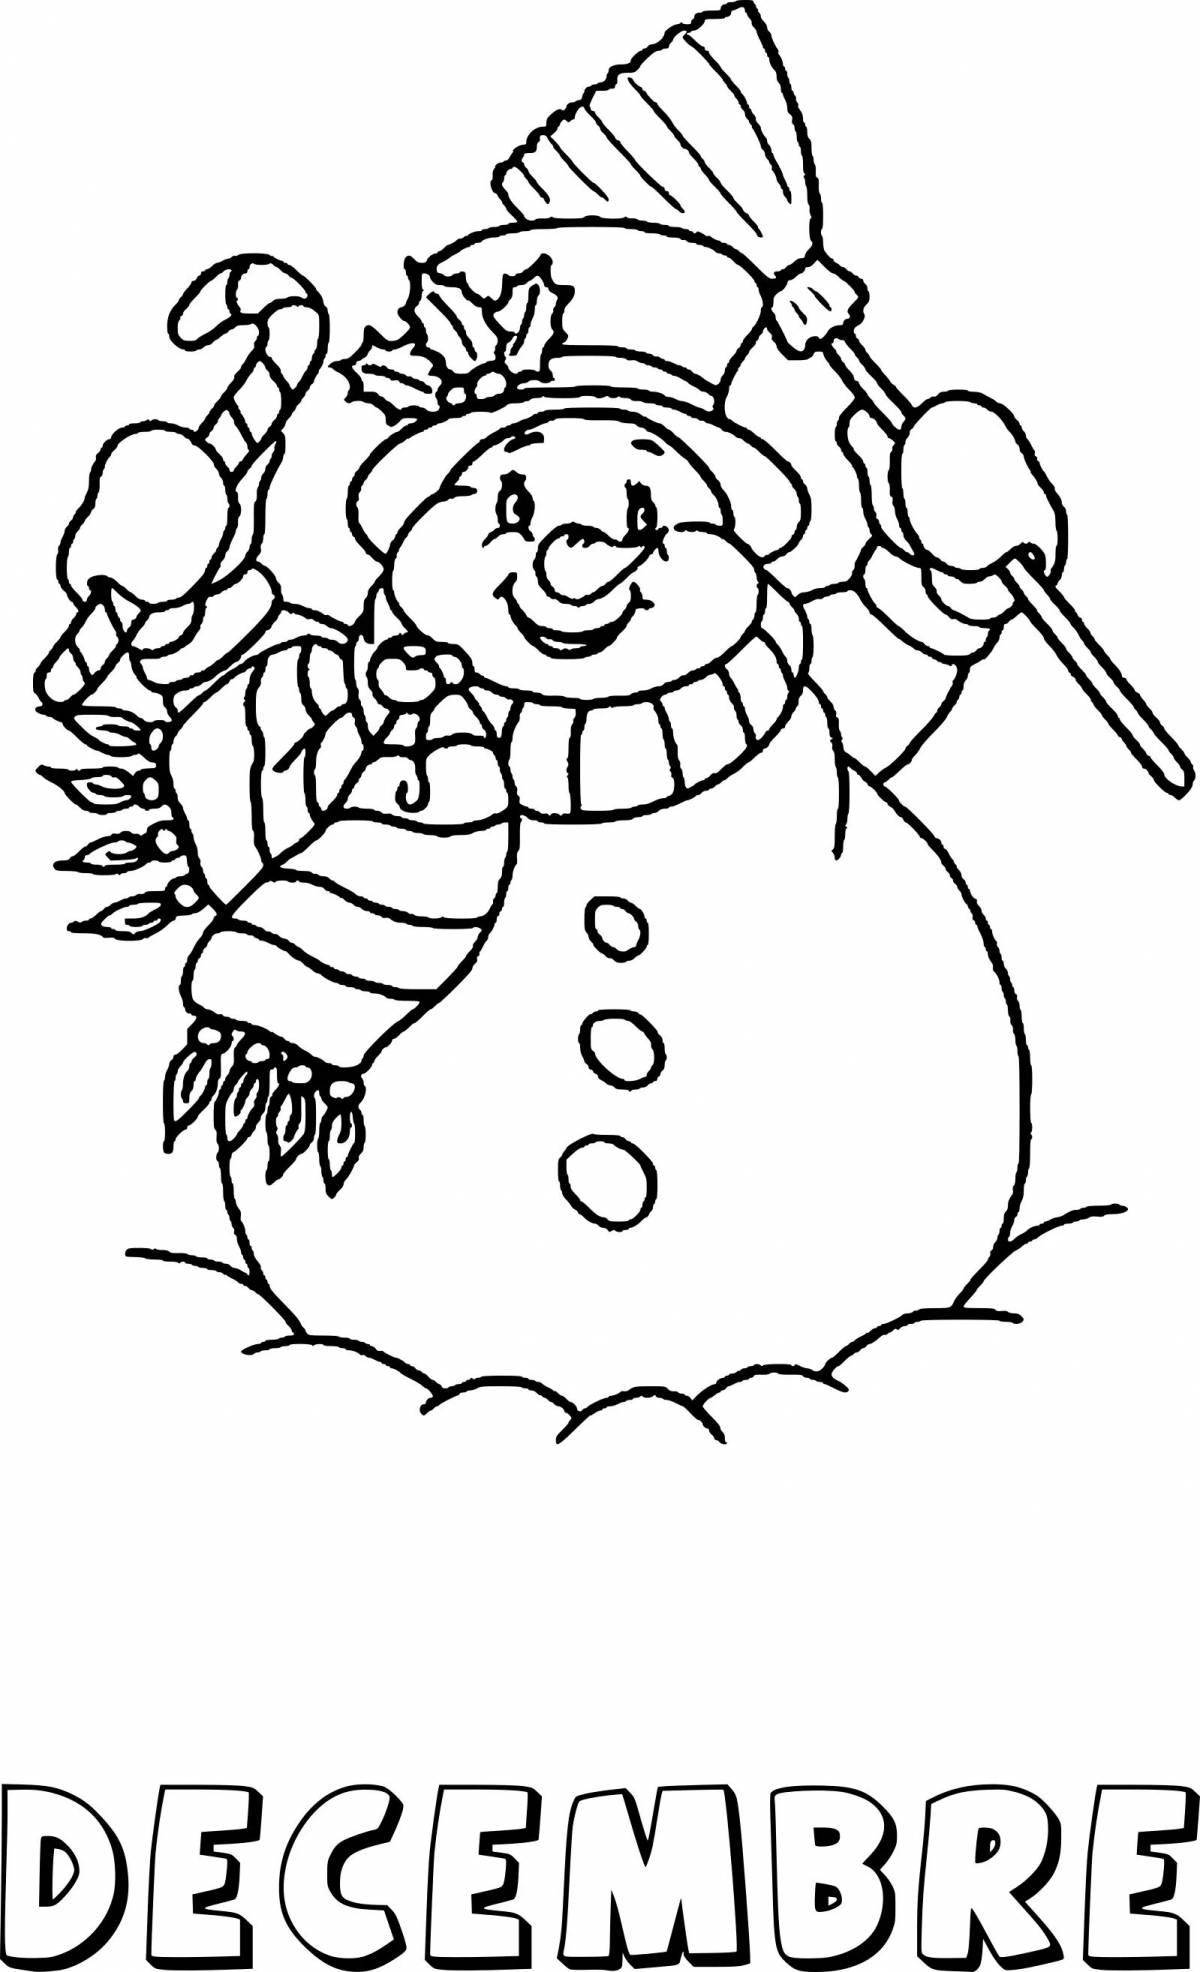 Creative snowman coloring for kids